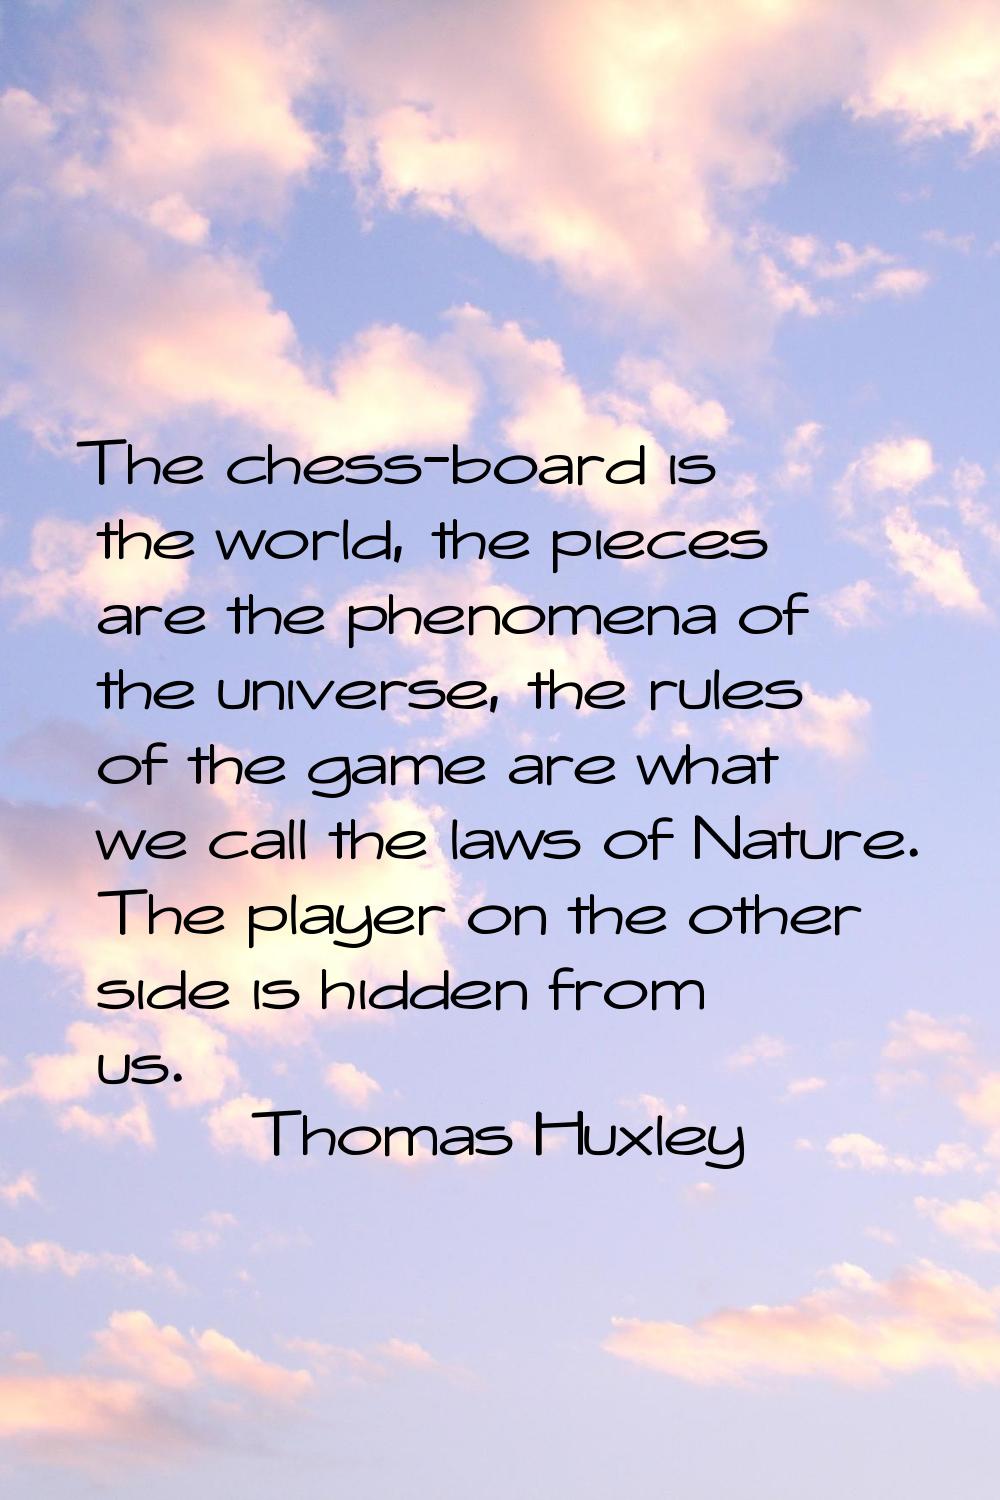 The chess-board is the world, the pieces are the phenomena of the universe, the rules of the game a